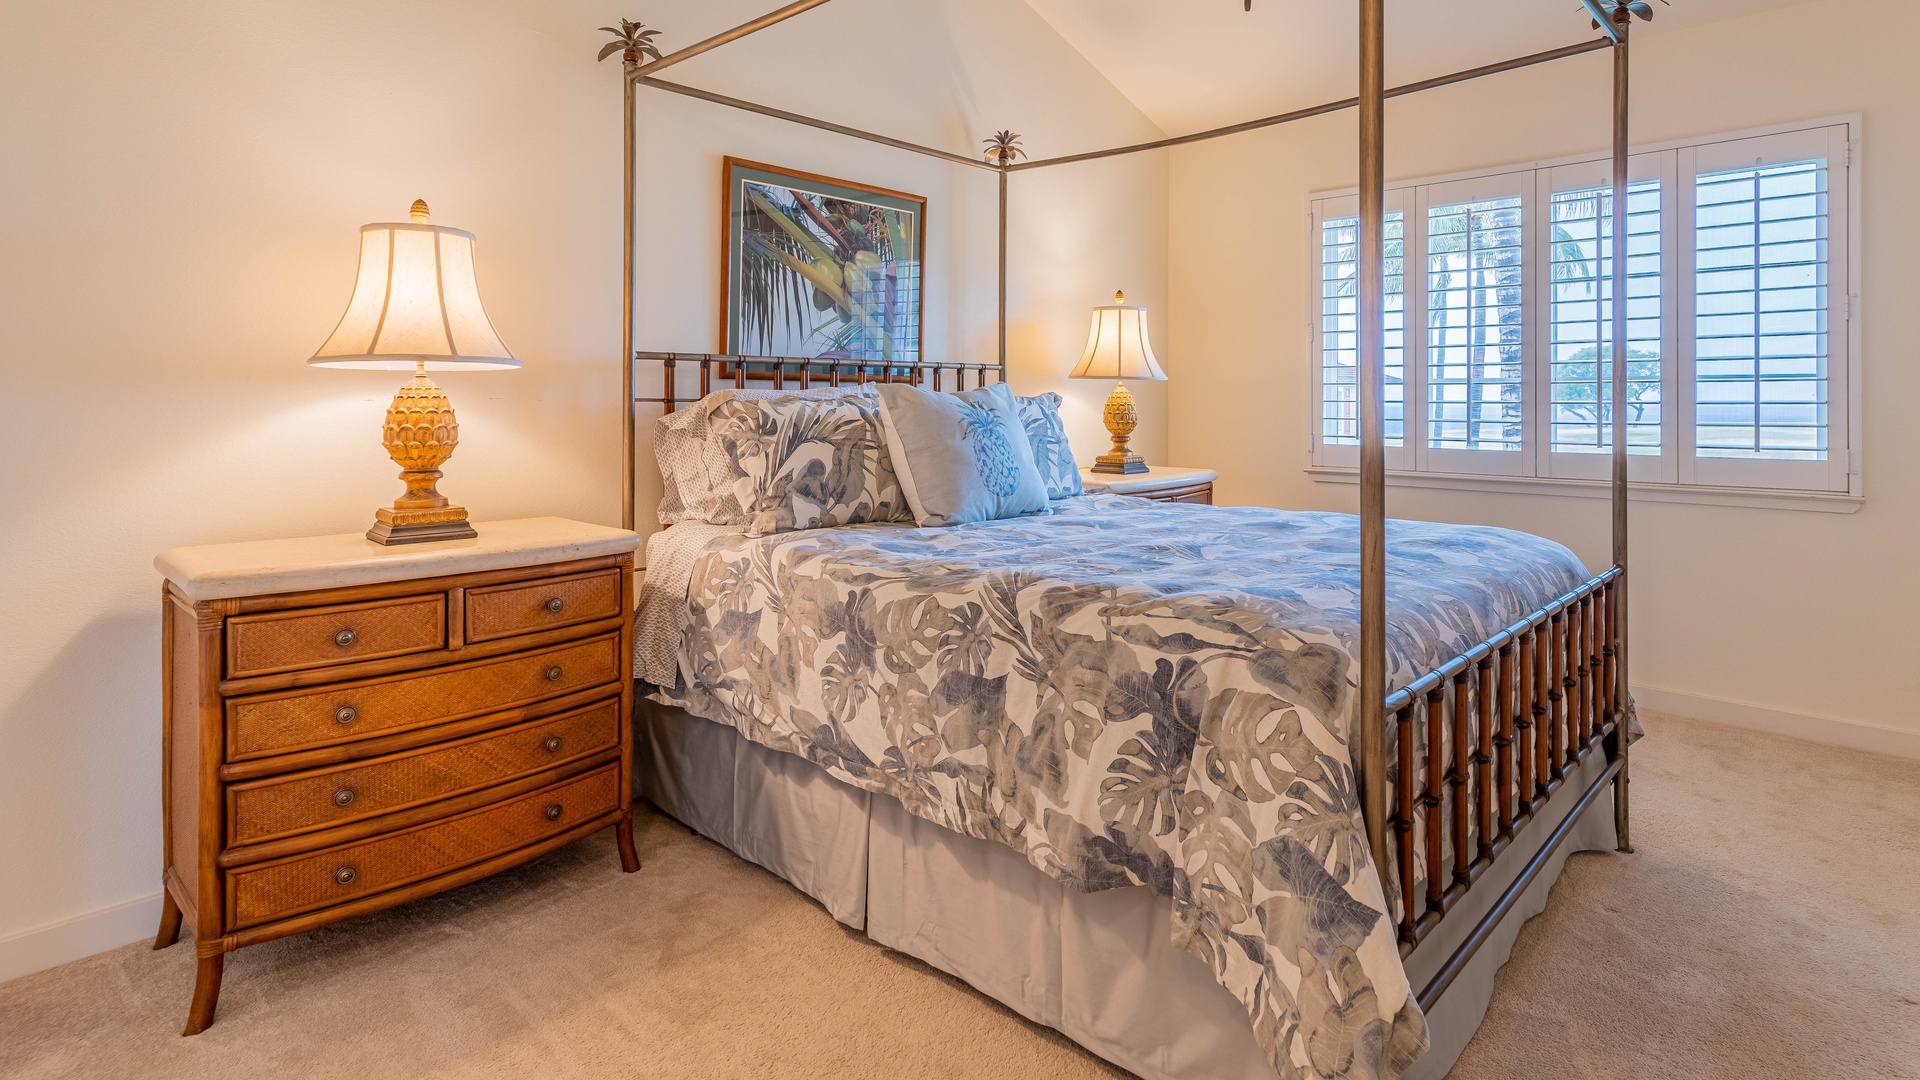 Kapolei Vacation Rentals, Kai Lani 20C - The primary guest bedroom with scenic views and a dresser.